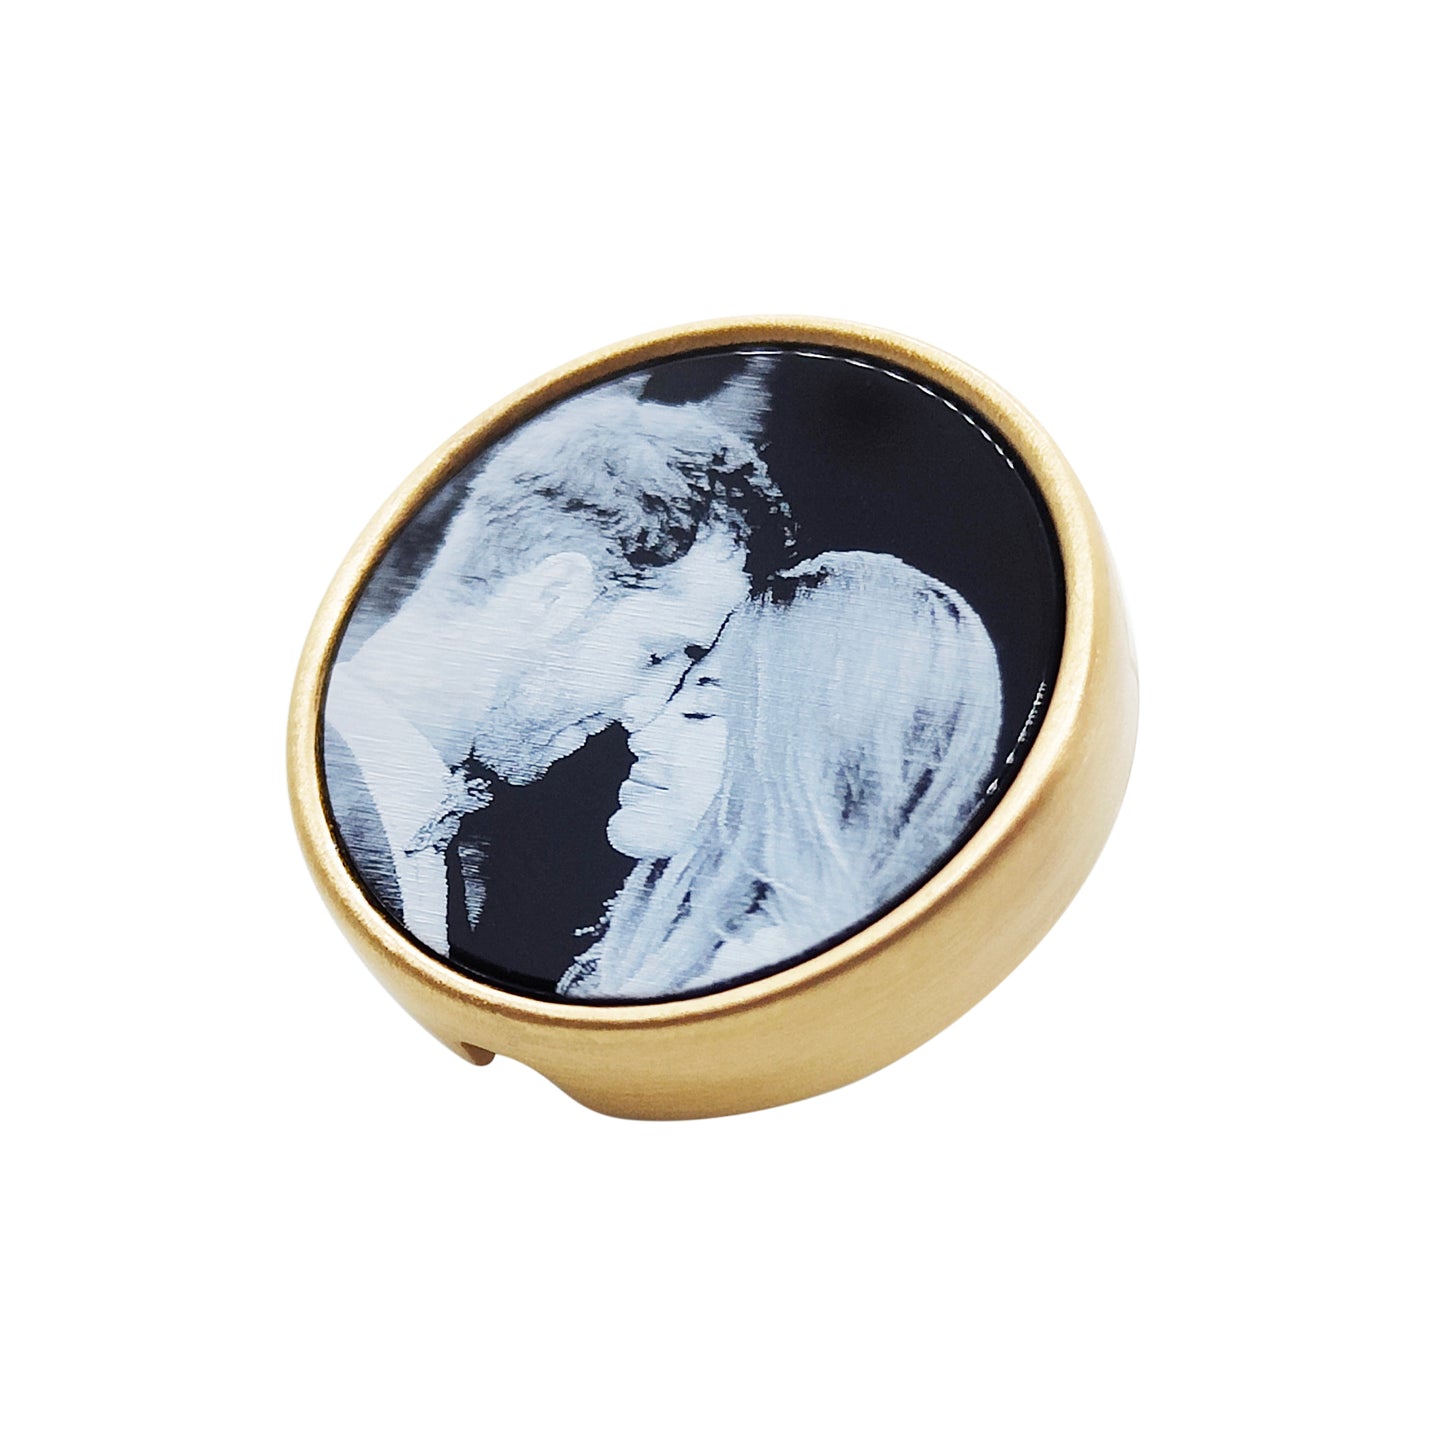 21mm button in brushed gold metal and black onyx